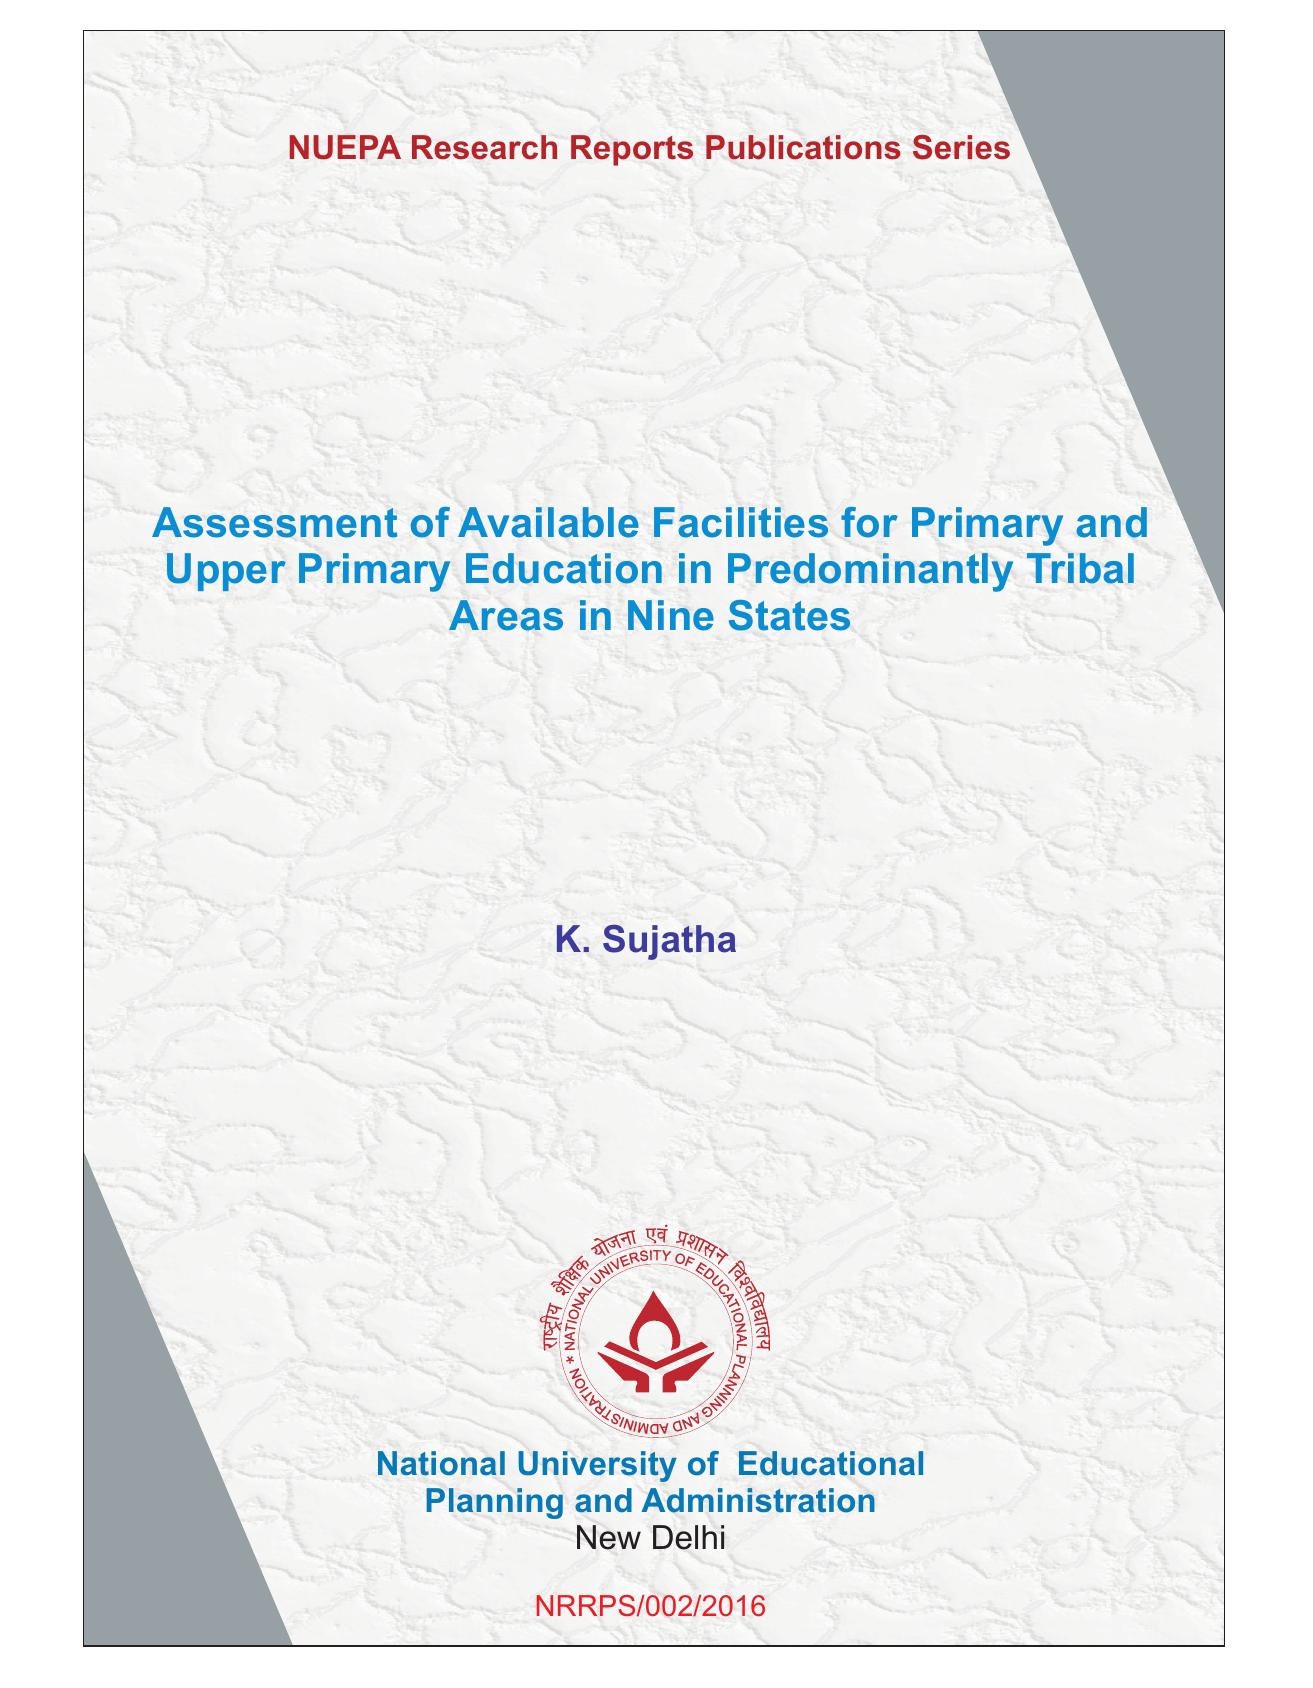 Assessment of Available Facilities for Primary and Upper Primary Education in Predominantly 2016.pdf